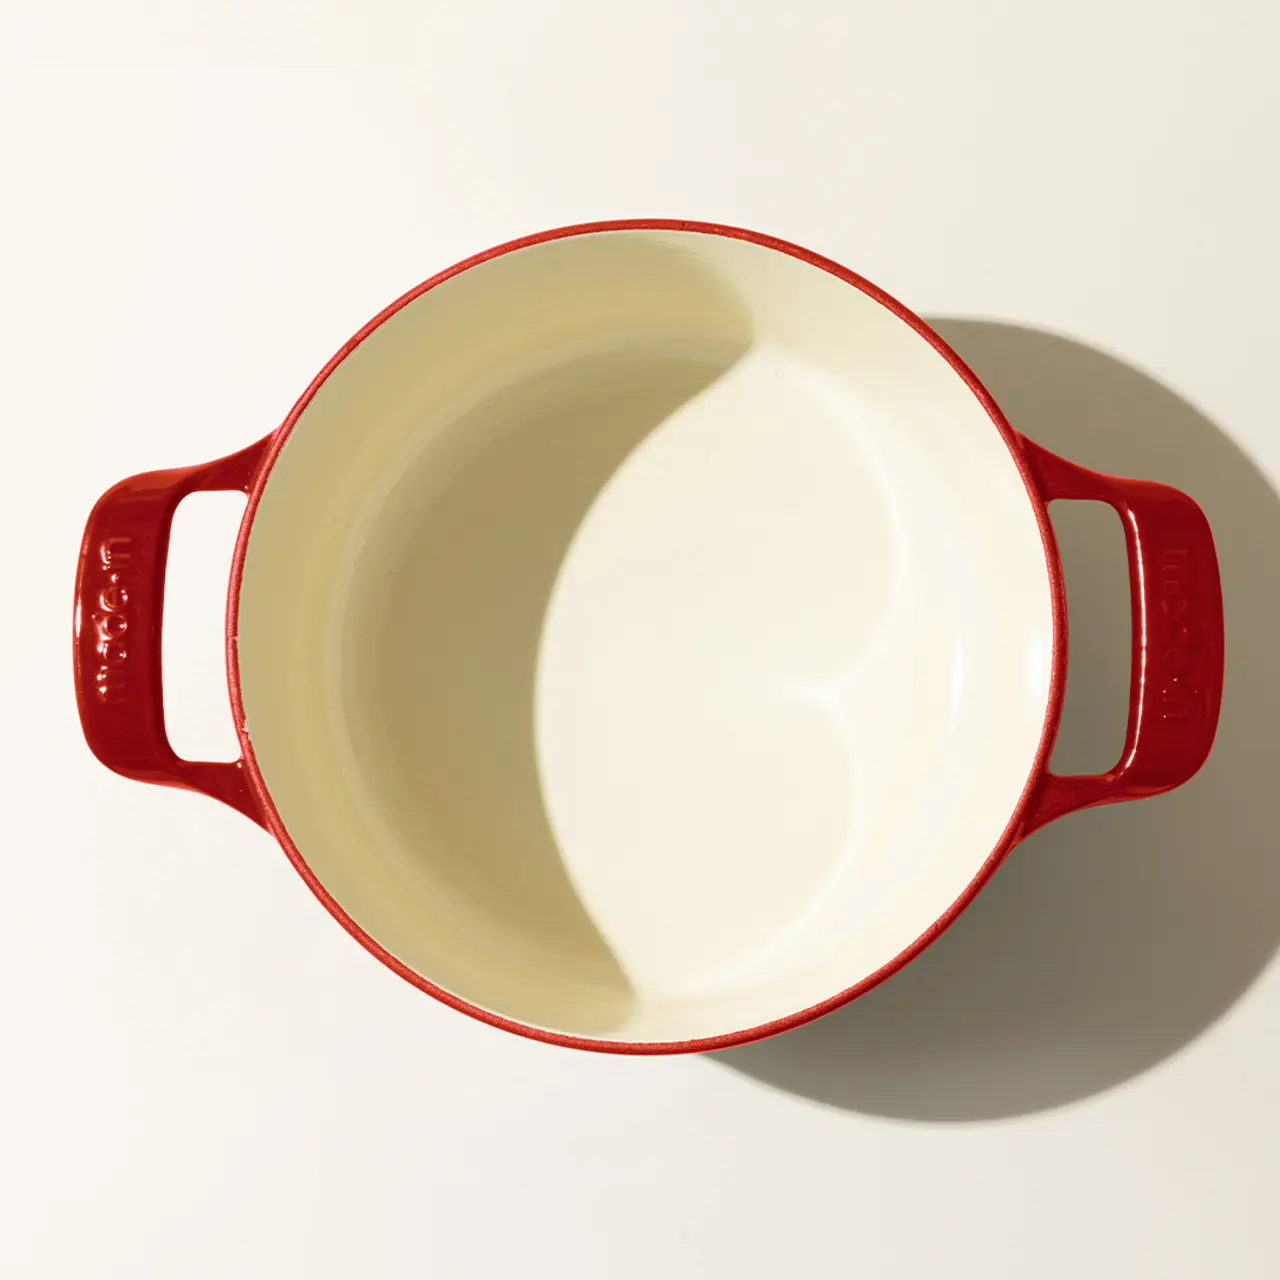 A top-down view of an empty red ceramic pot with two handles on a light surface.